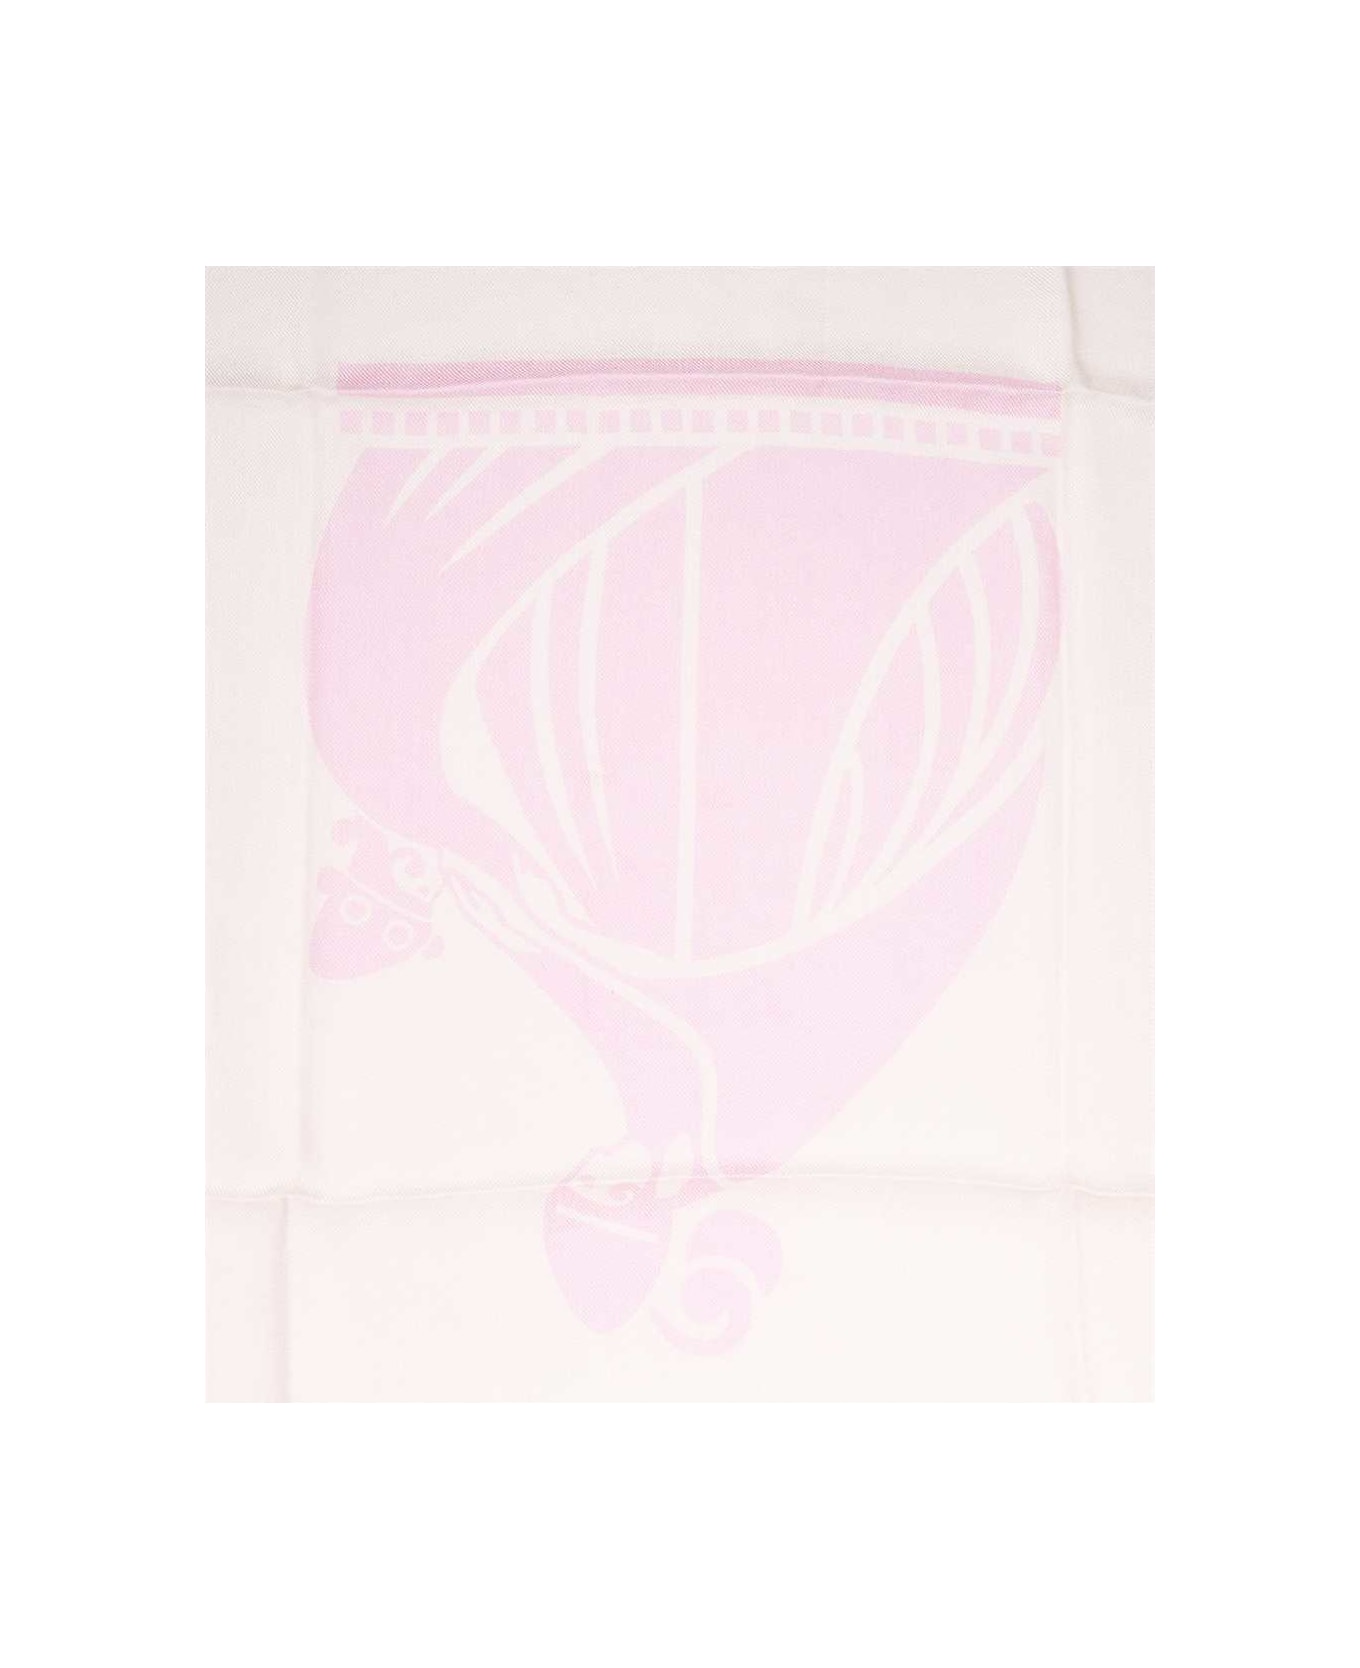 Lanvin Modal And Cashmere Blend Scarf - Pink